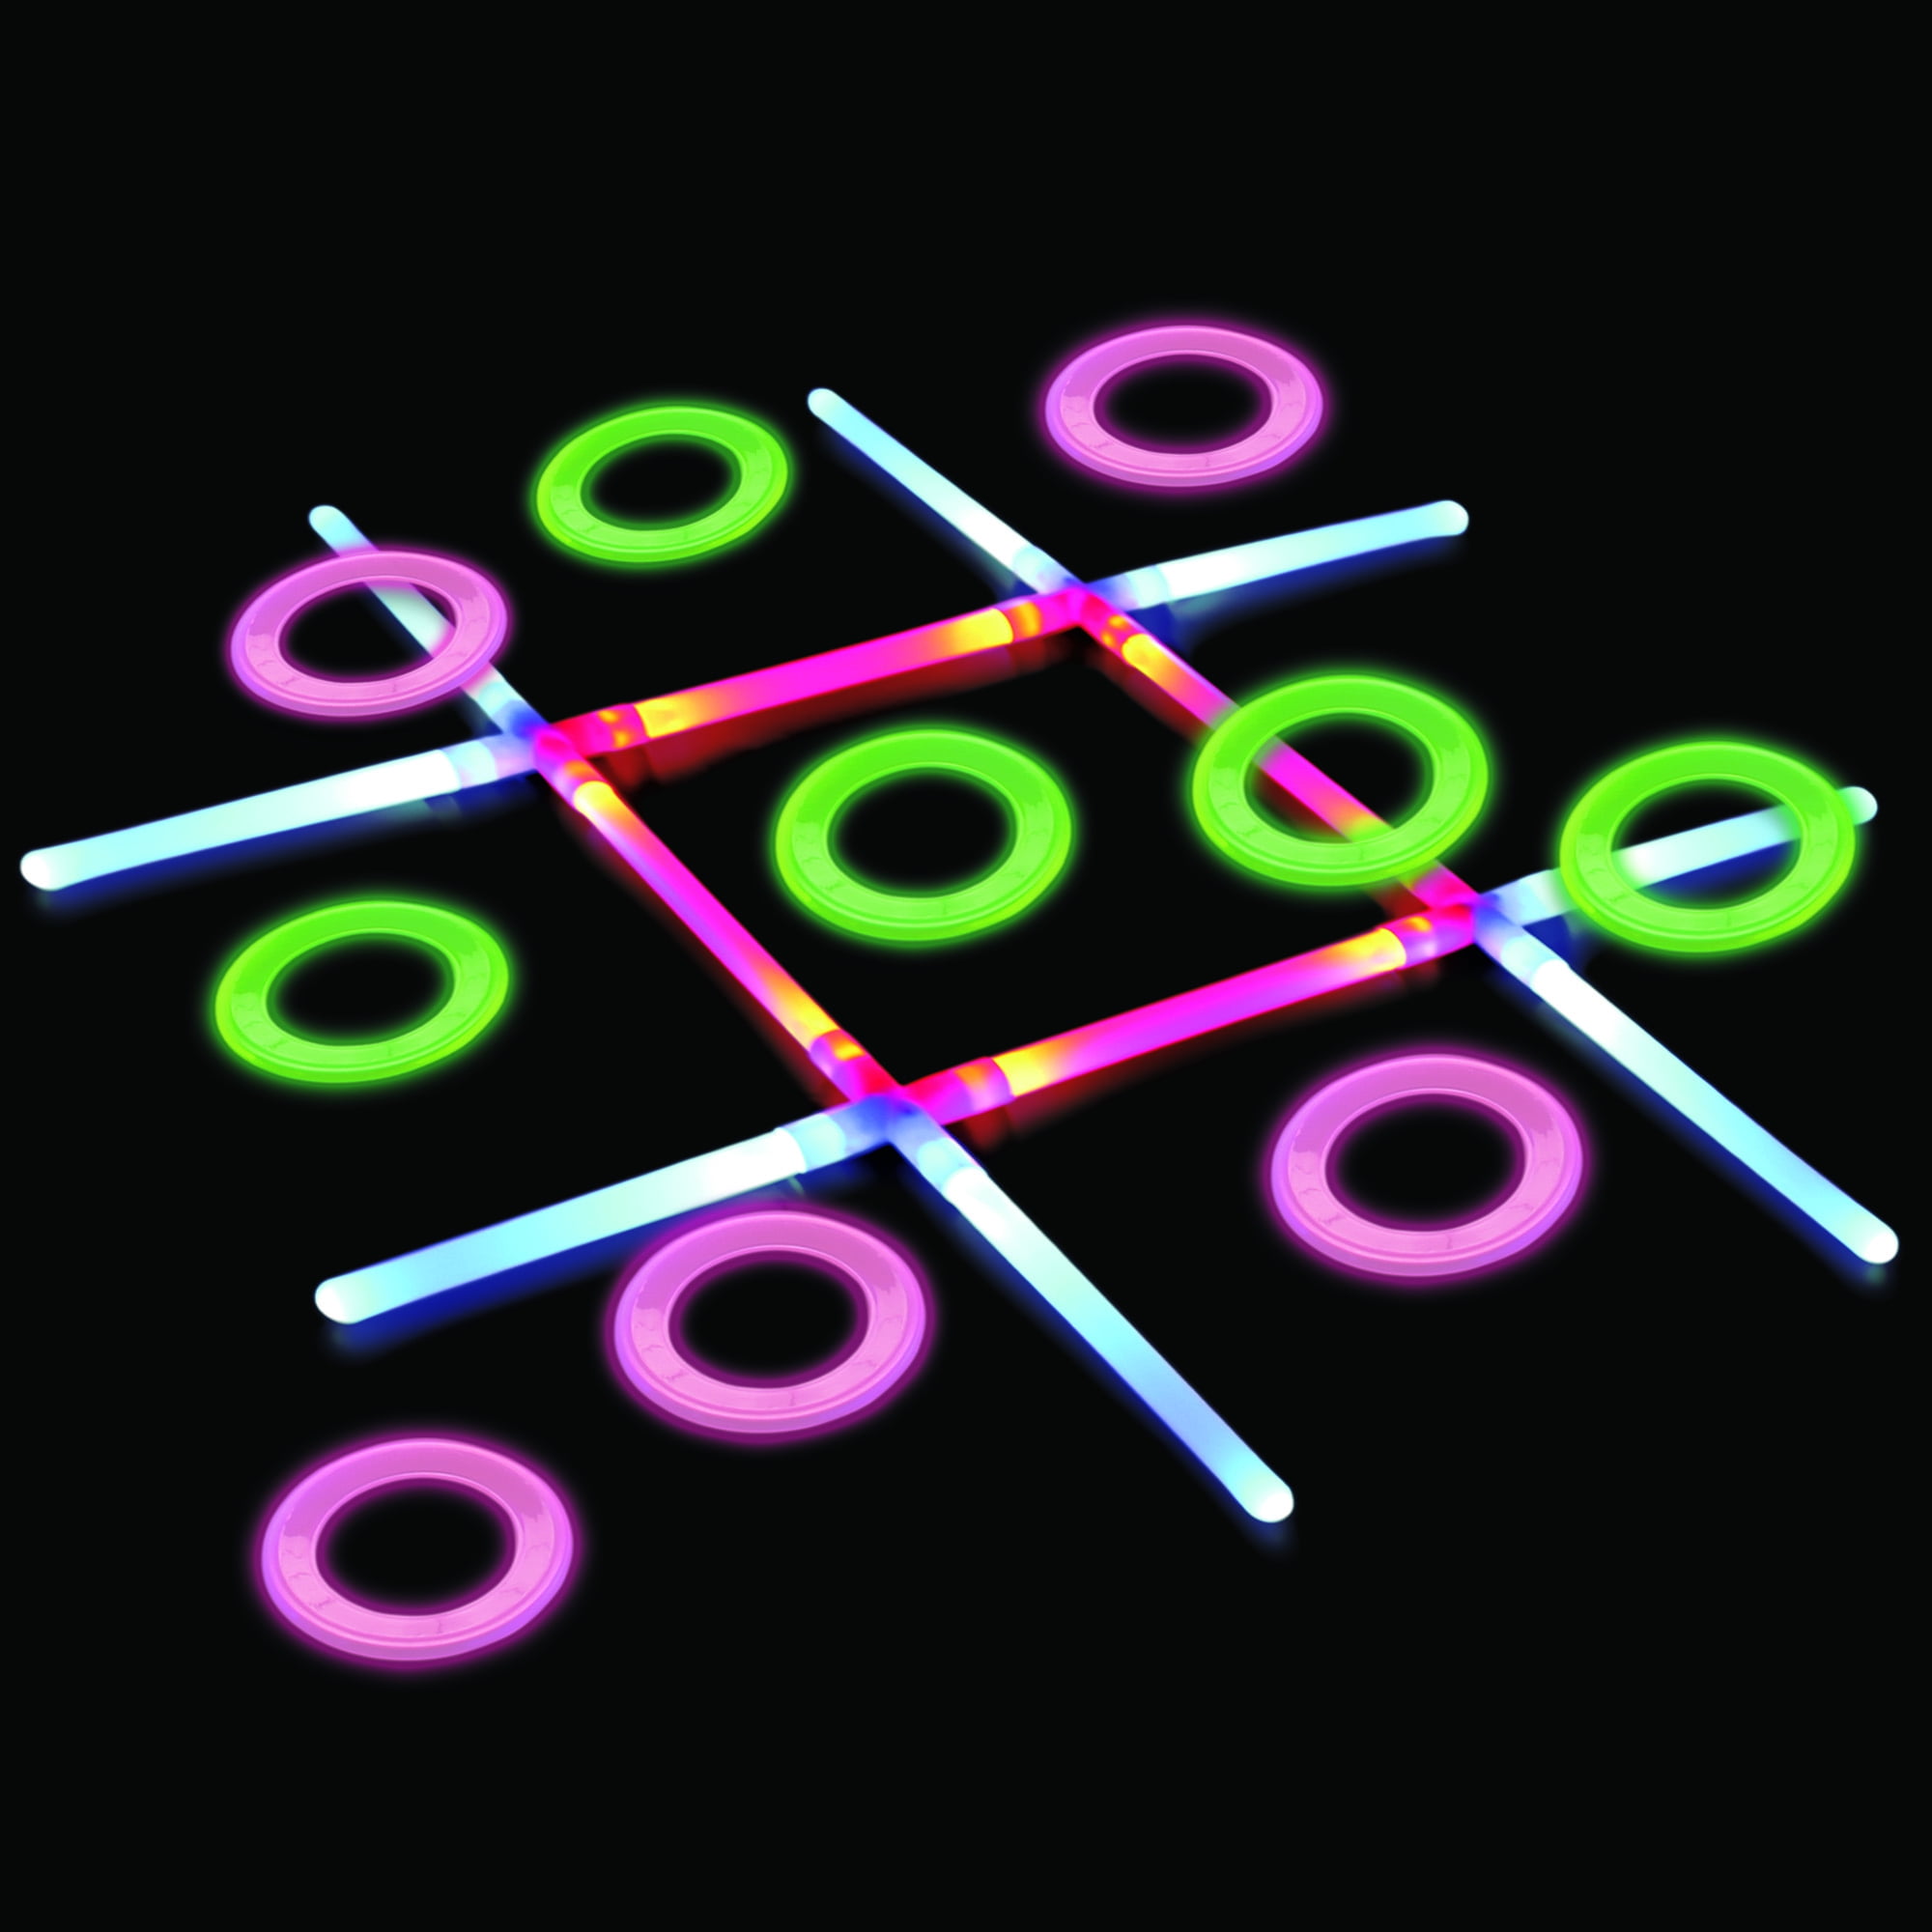 Tic Tac Toe Light-Up Toss Game Lights Up for Day Or Nightime Fun Battery Powered 